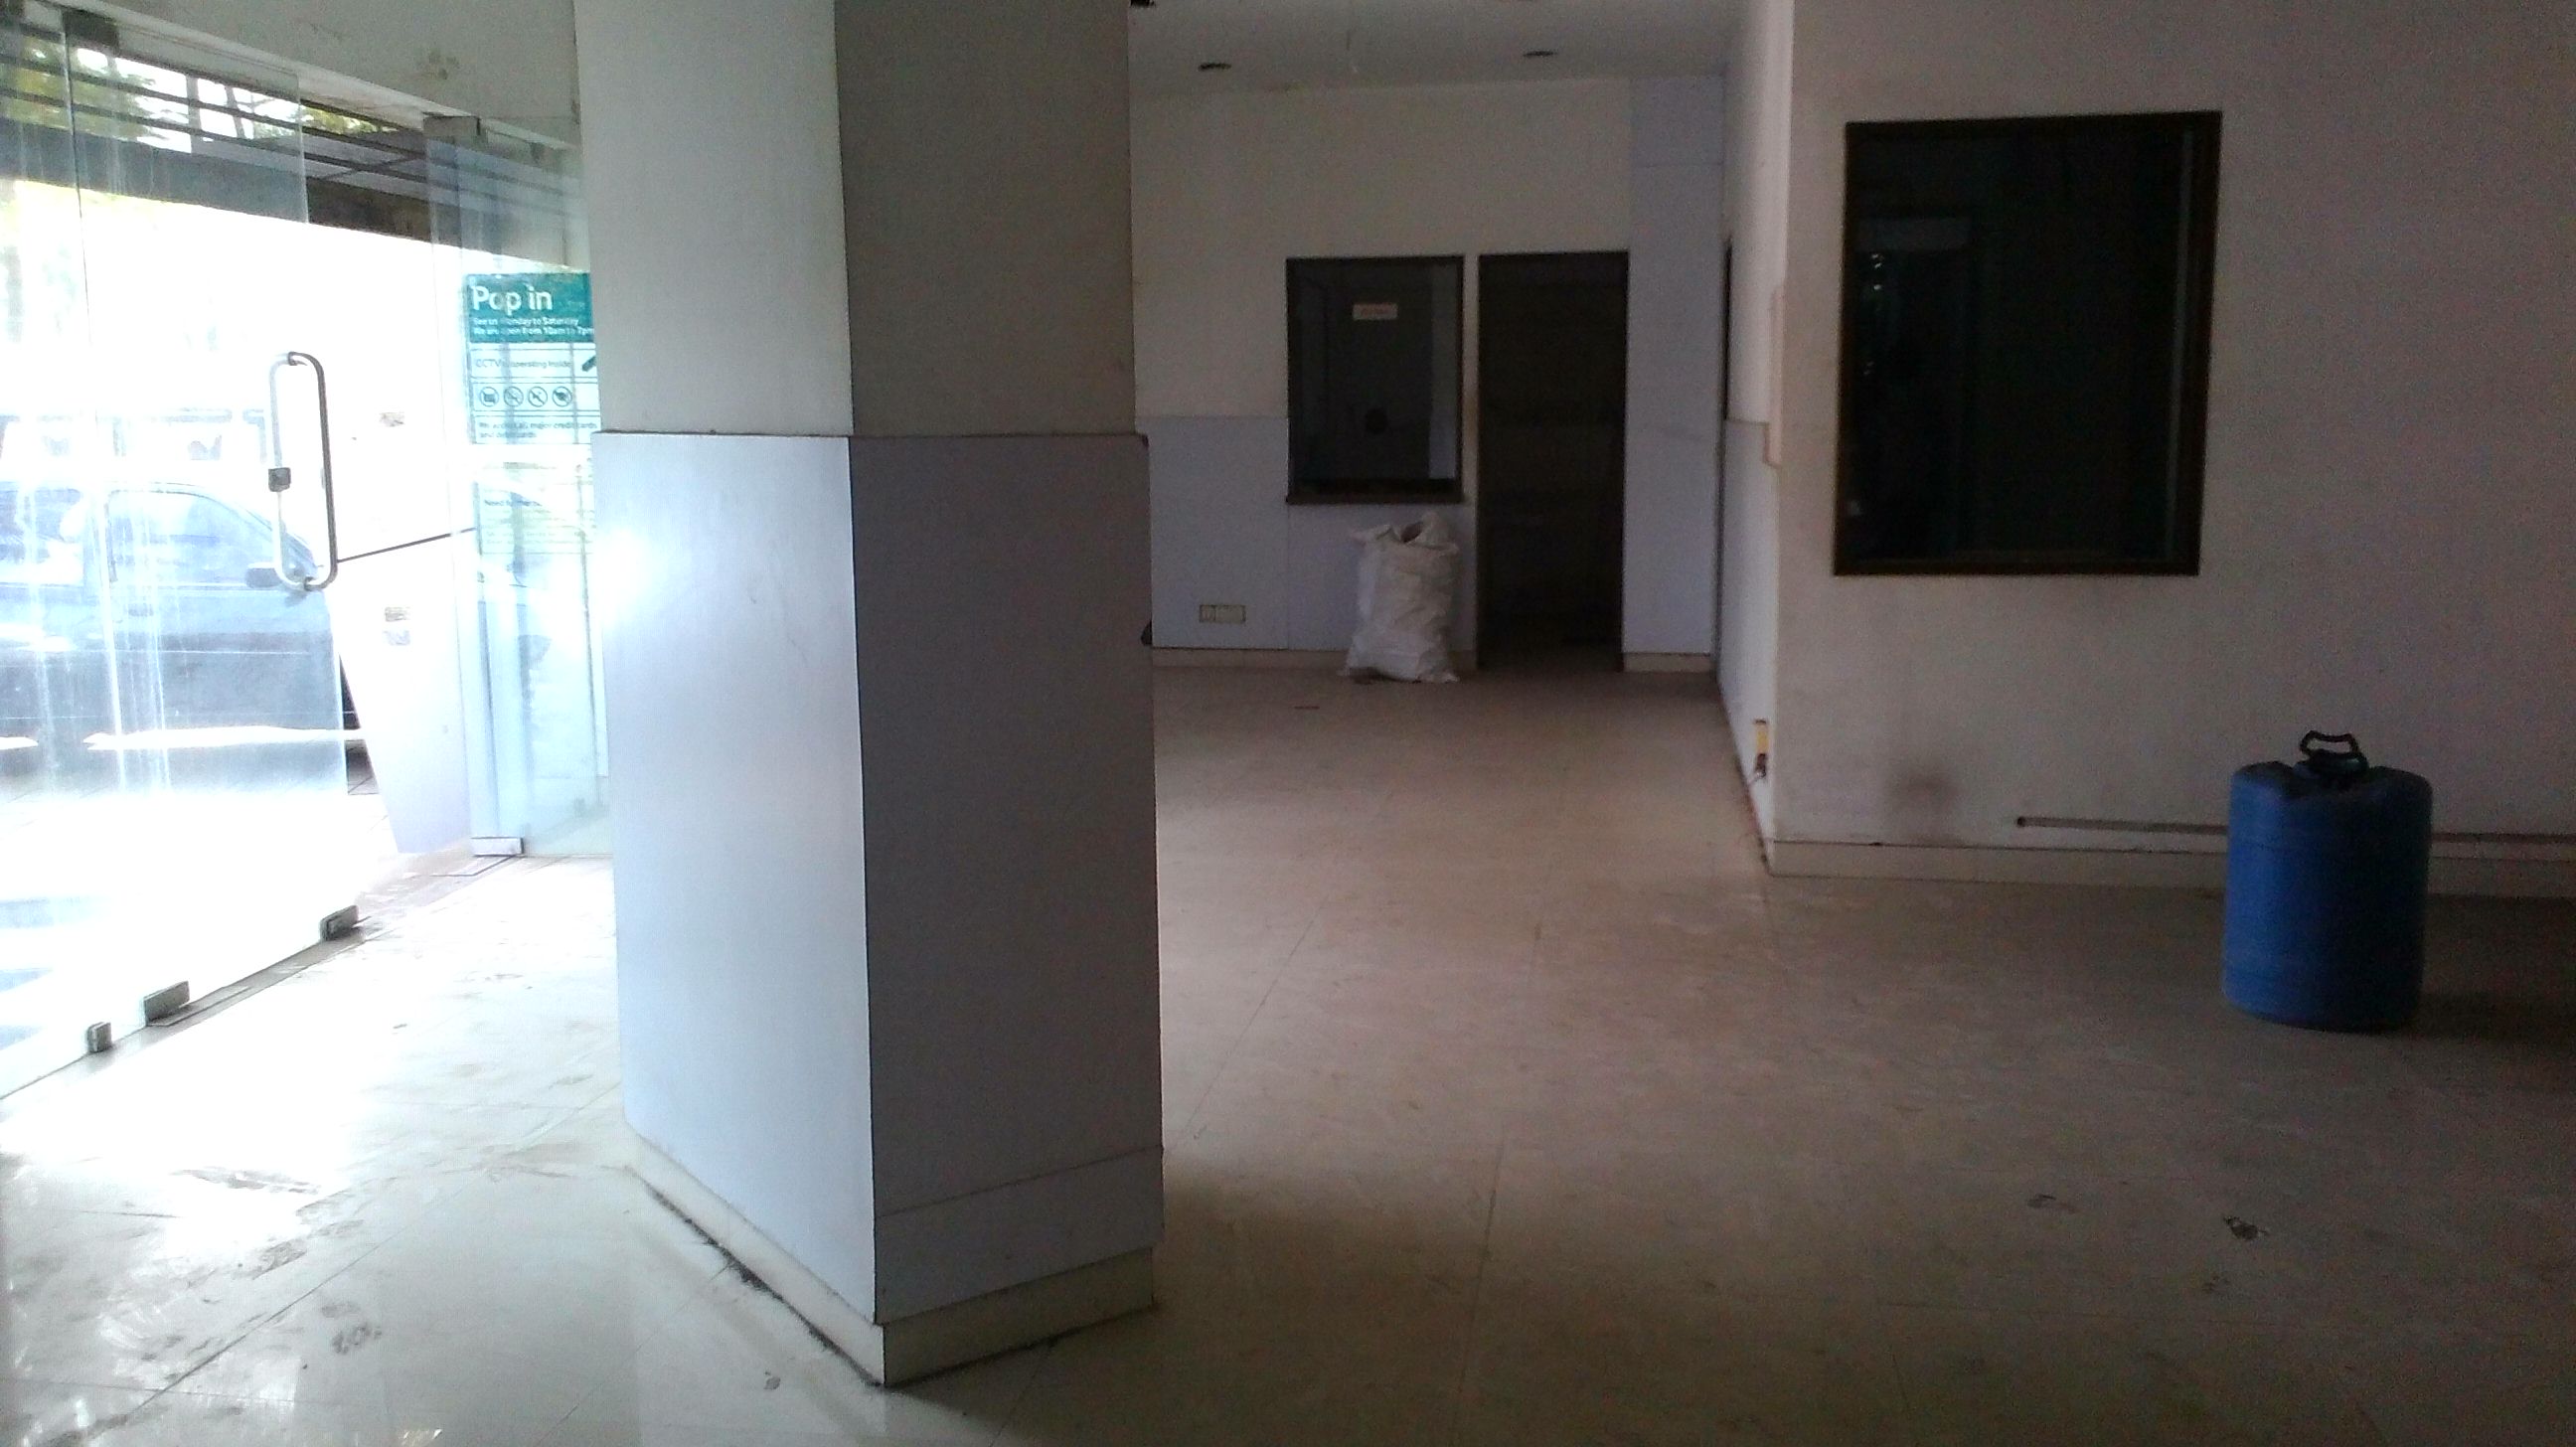 Commercial Shops for Rent in Solitaire Tower, Ghodbunder Road. Near Dosti Imperia, Thane-West, Mumbai